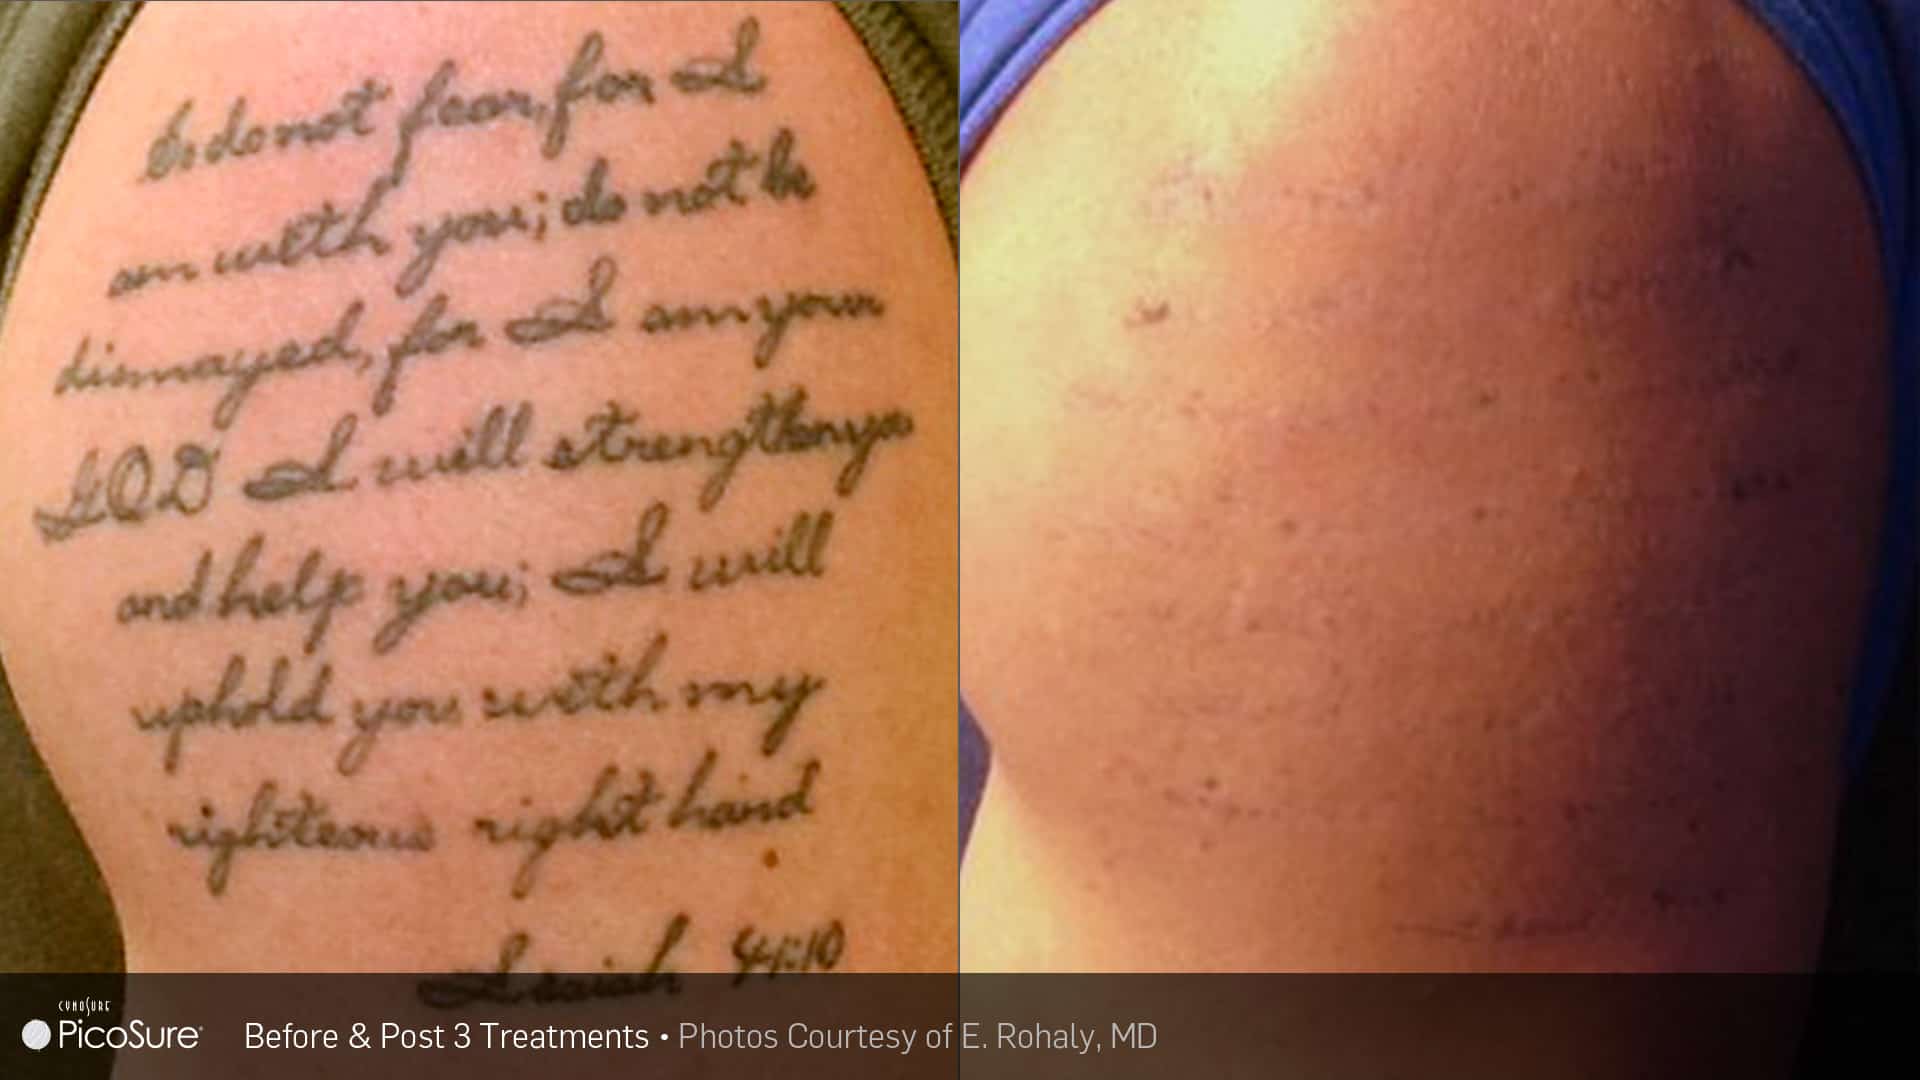 Zapp Laser Studio  After just ONE PicoSure Laser Treatment PocoSure    PicoSure Tattoo Removal  Fading for a cover up  1st  Treatment  Treatment took 10 minutes  Discomfort